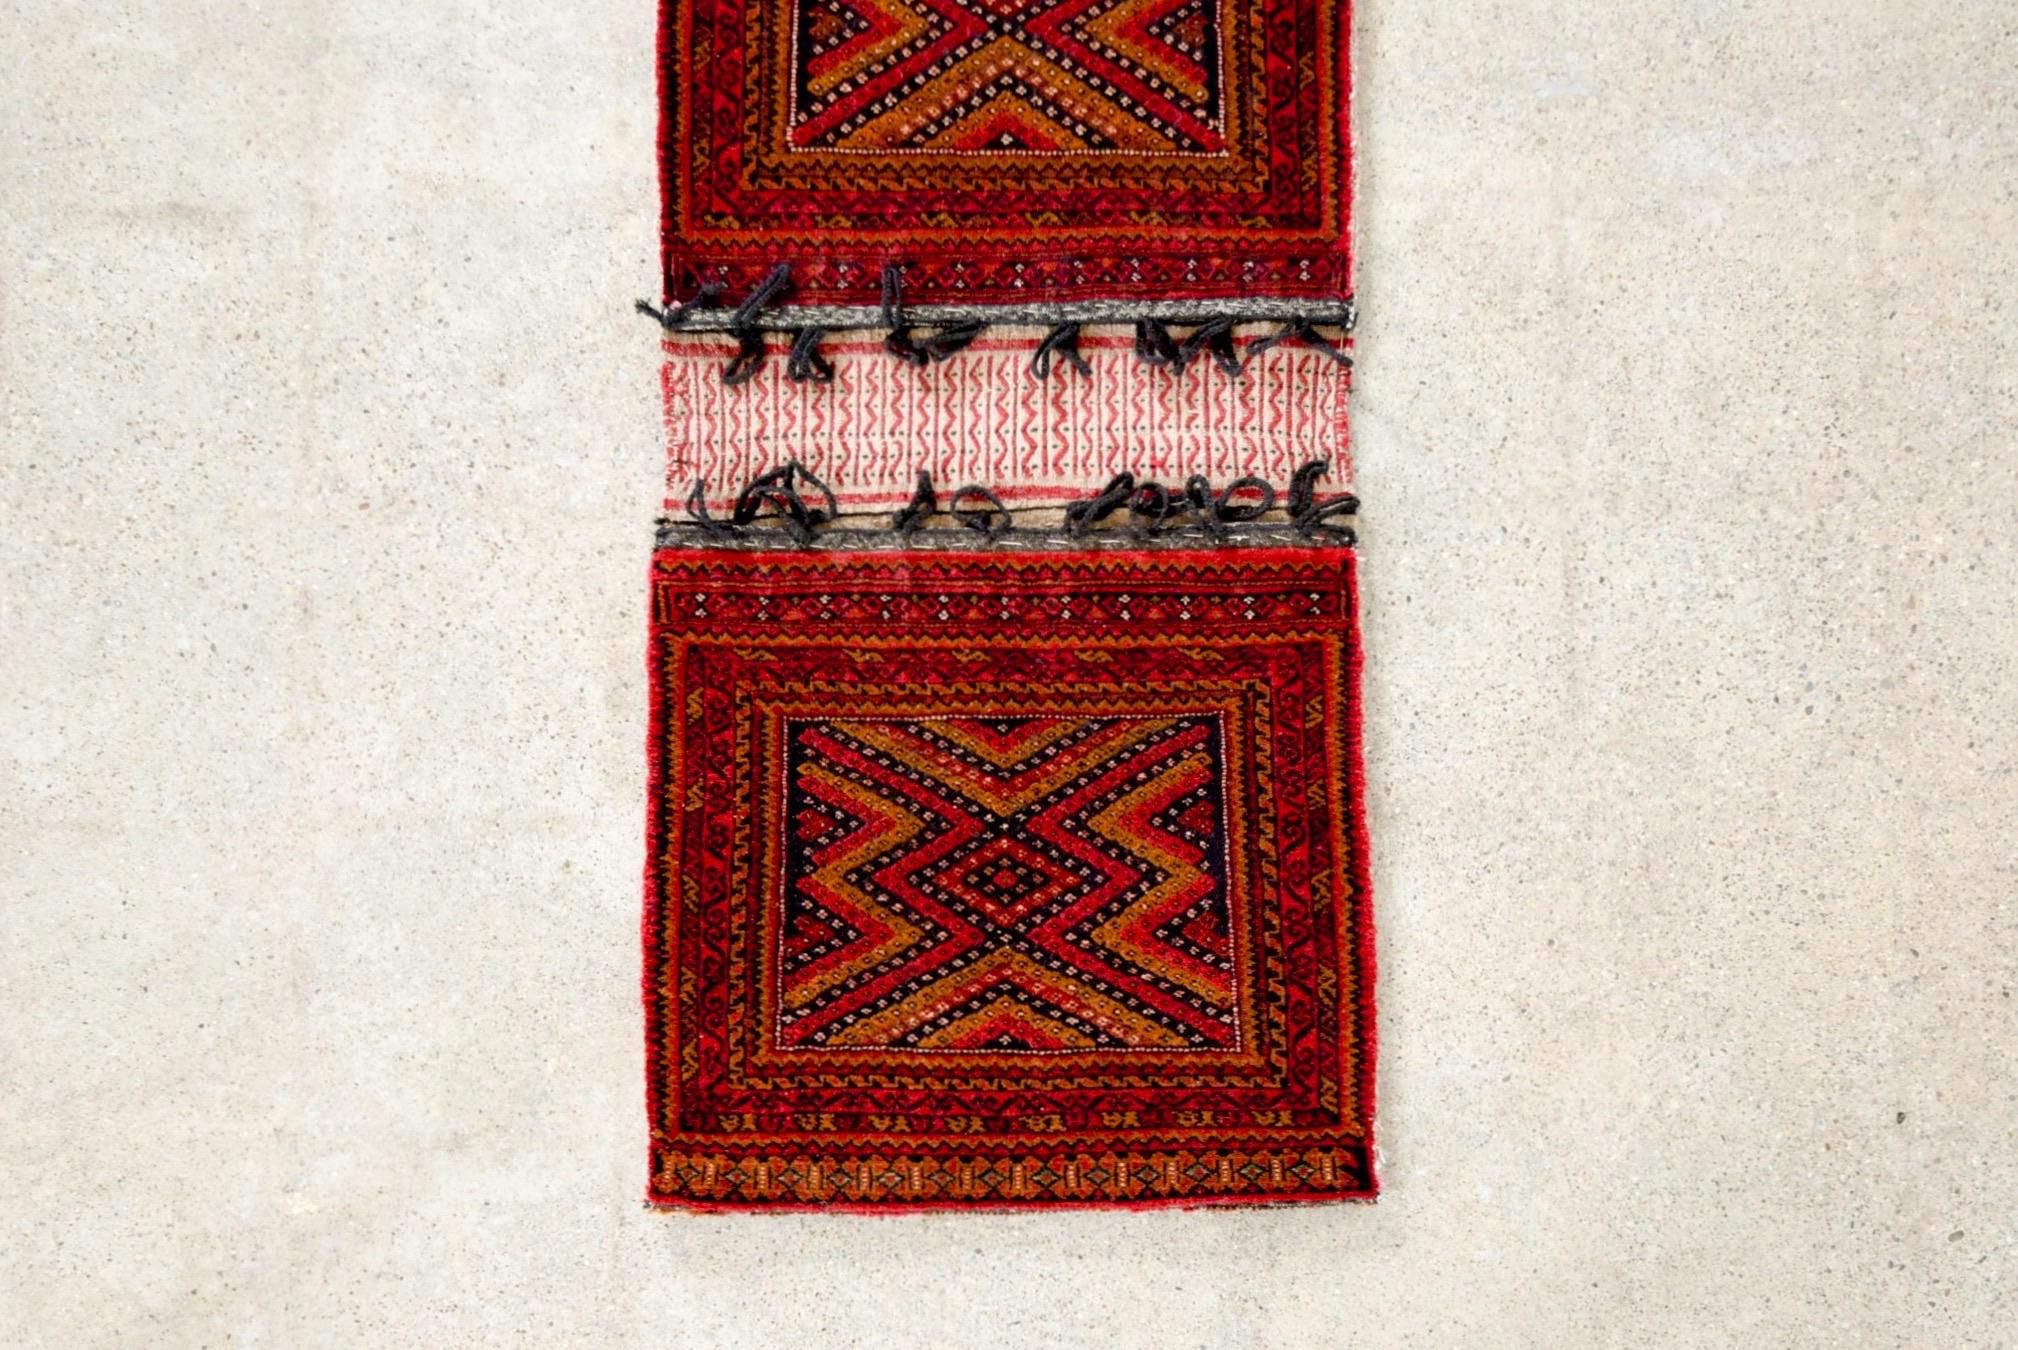 This authentic vintage Baluch tribal saddlebag rug is from a region near present-day Afghanistan and Pakistan. This small expertly handcrafted rug is connected by flat woven kilim with suspension loops and features an intricate geometric tribal